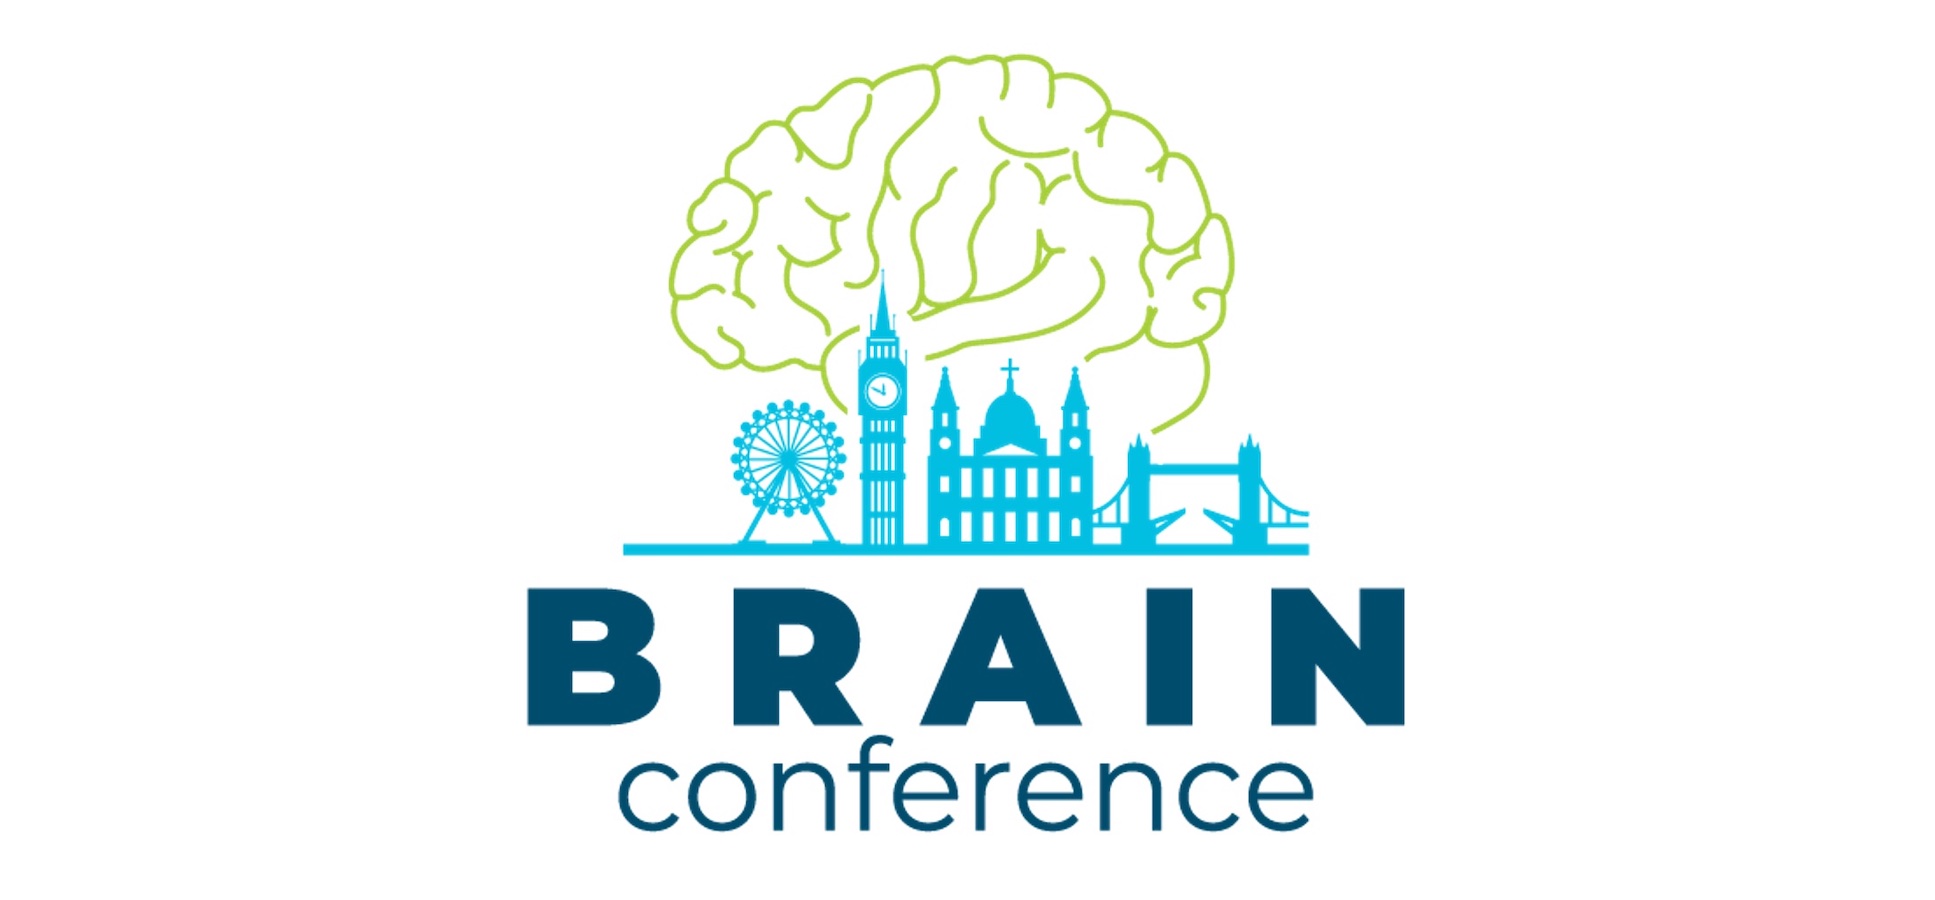 B.R.A.I.N Conference